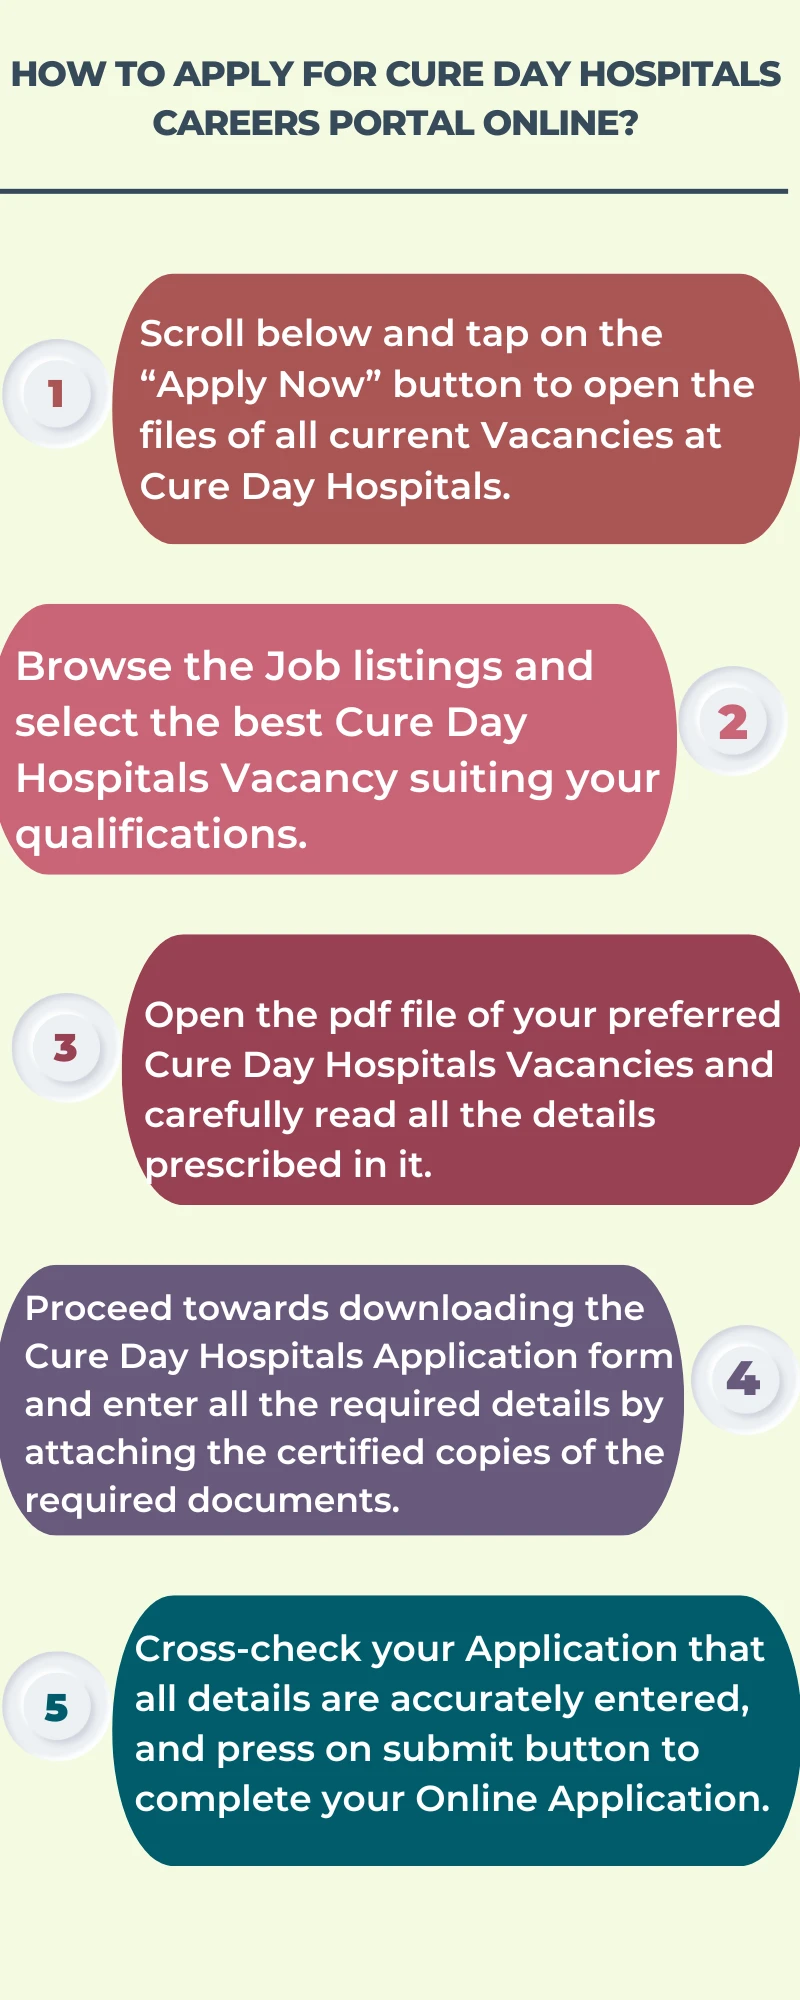 How To Apply for Cure Day Hospitals Careers Portal Online?